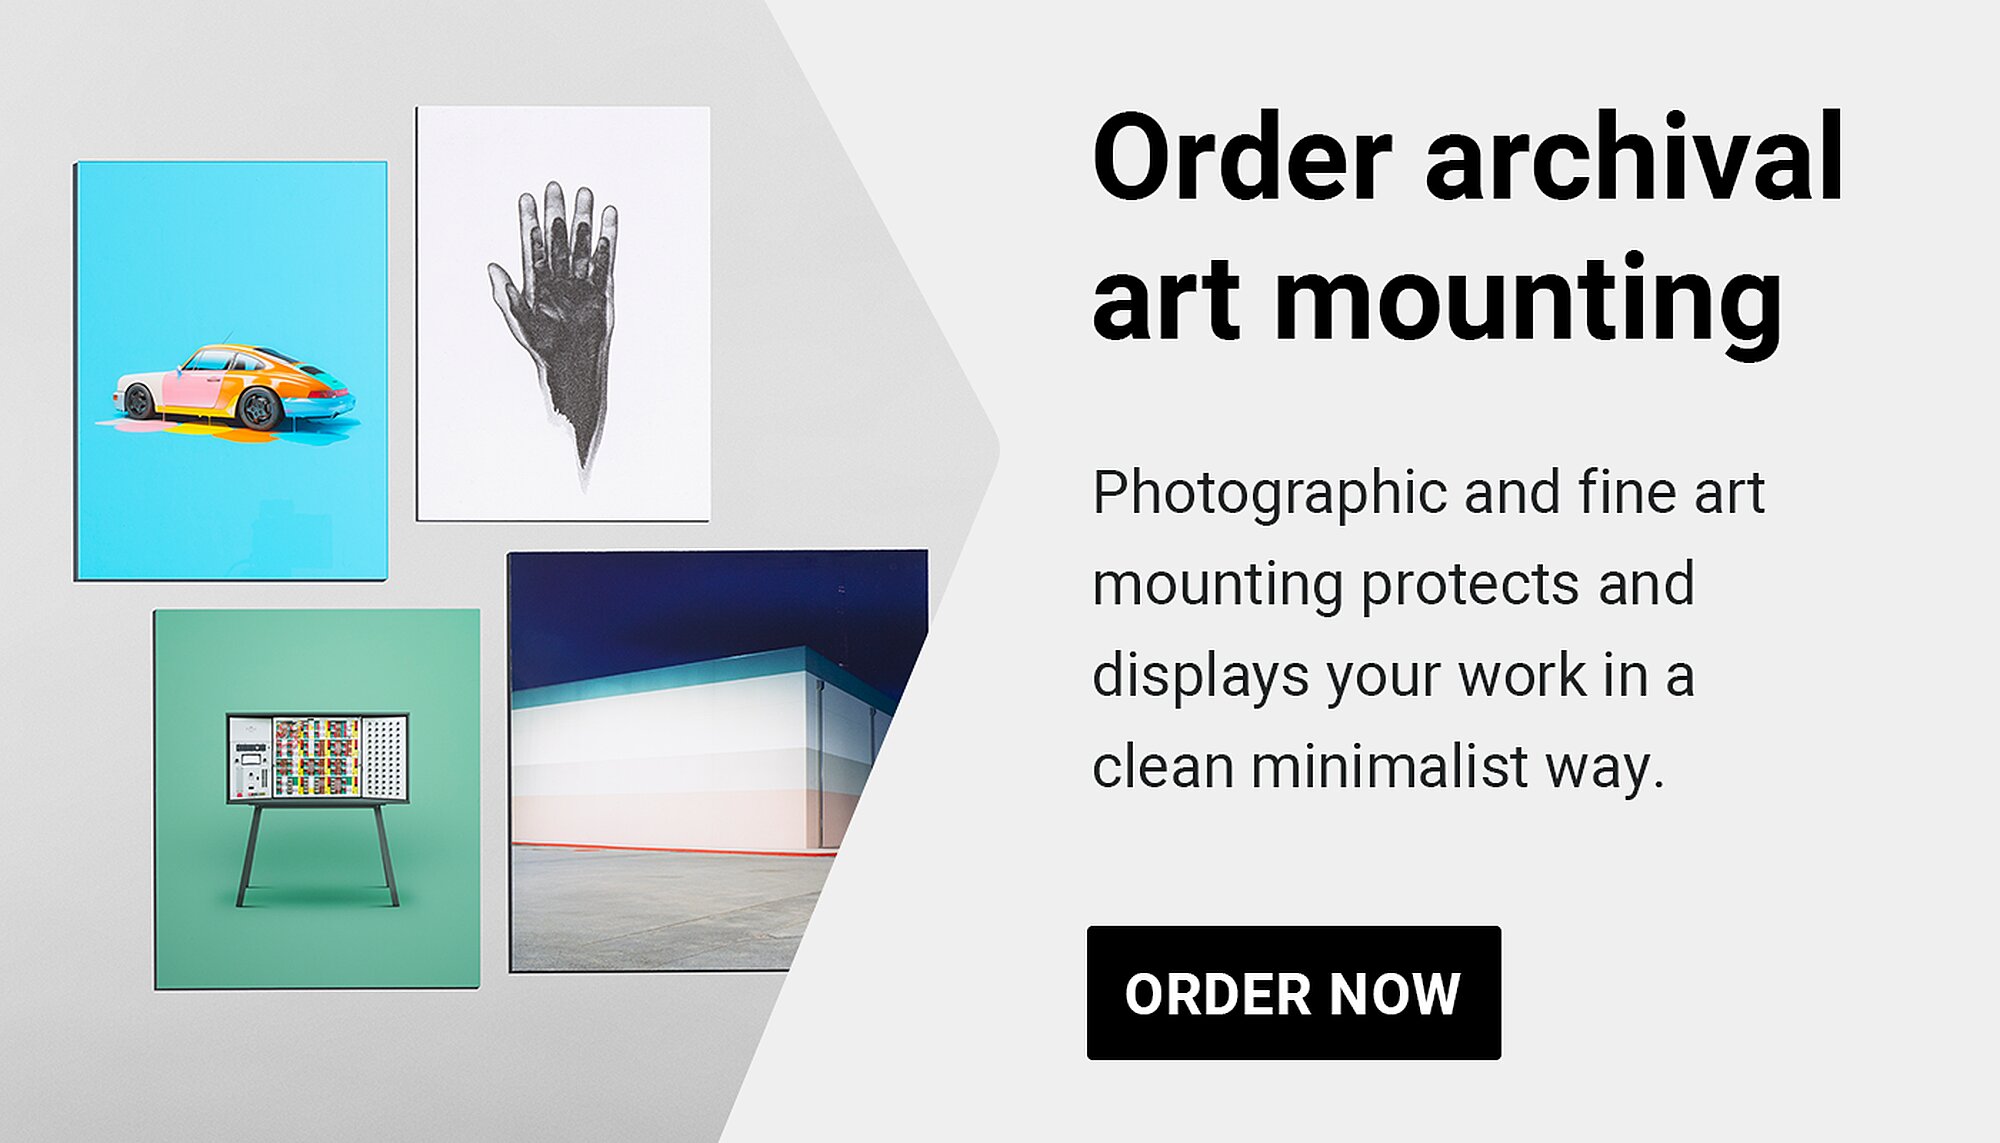 How to mount art; archival mounting of prints, drawings, paintings and more.